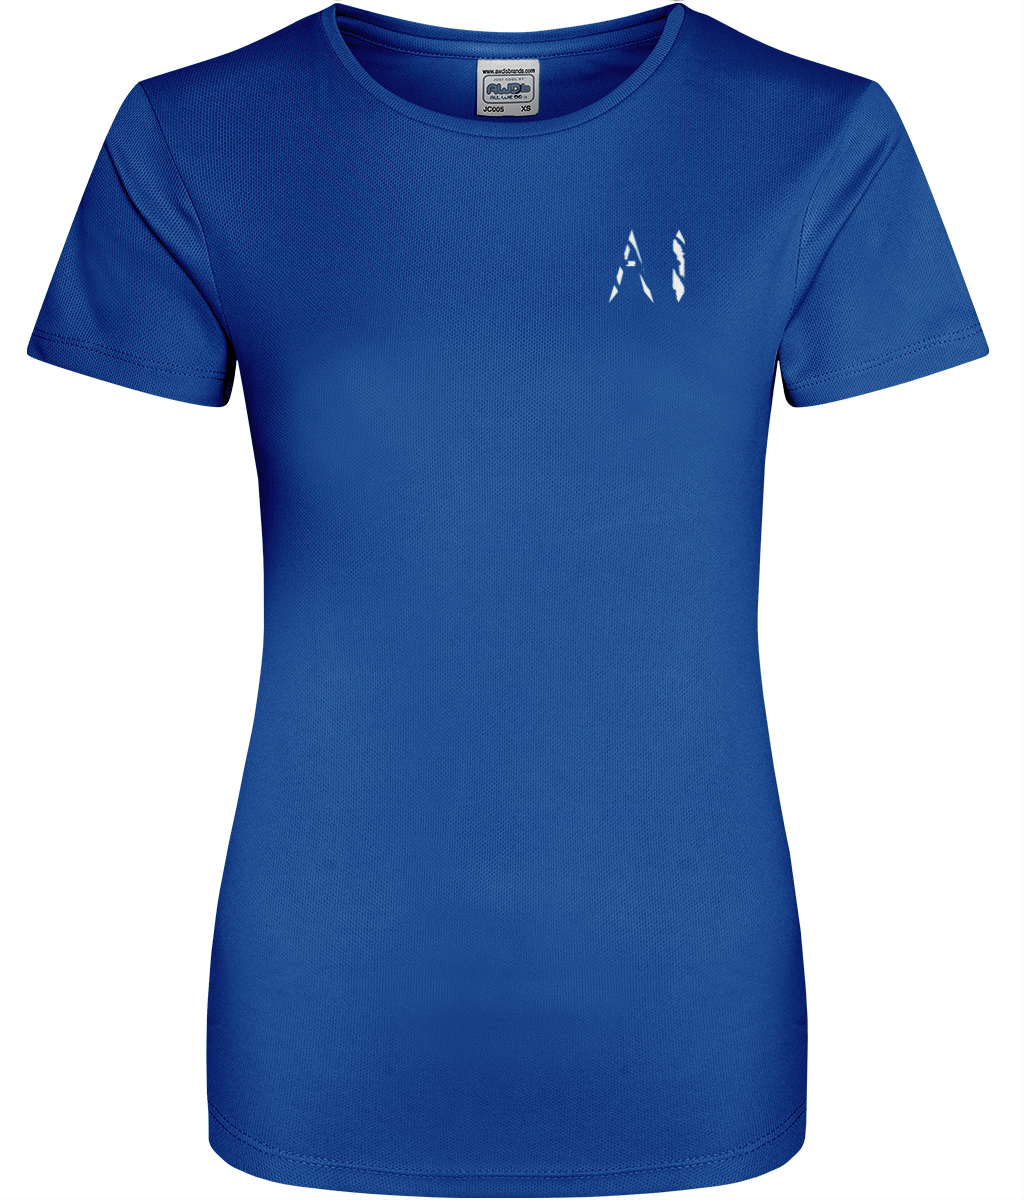 Womens blue Athletic Sports Shirt with White AI logo on left breast